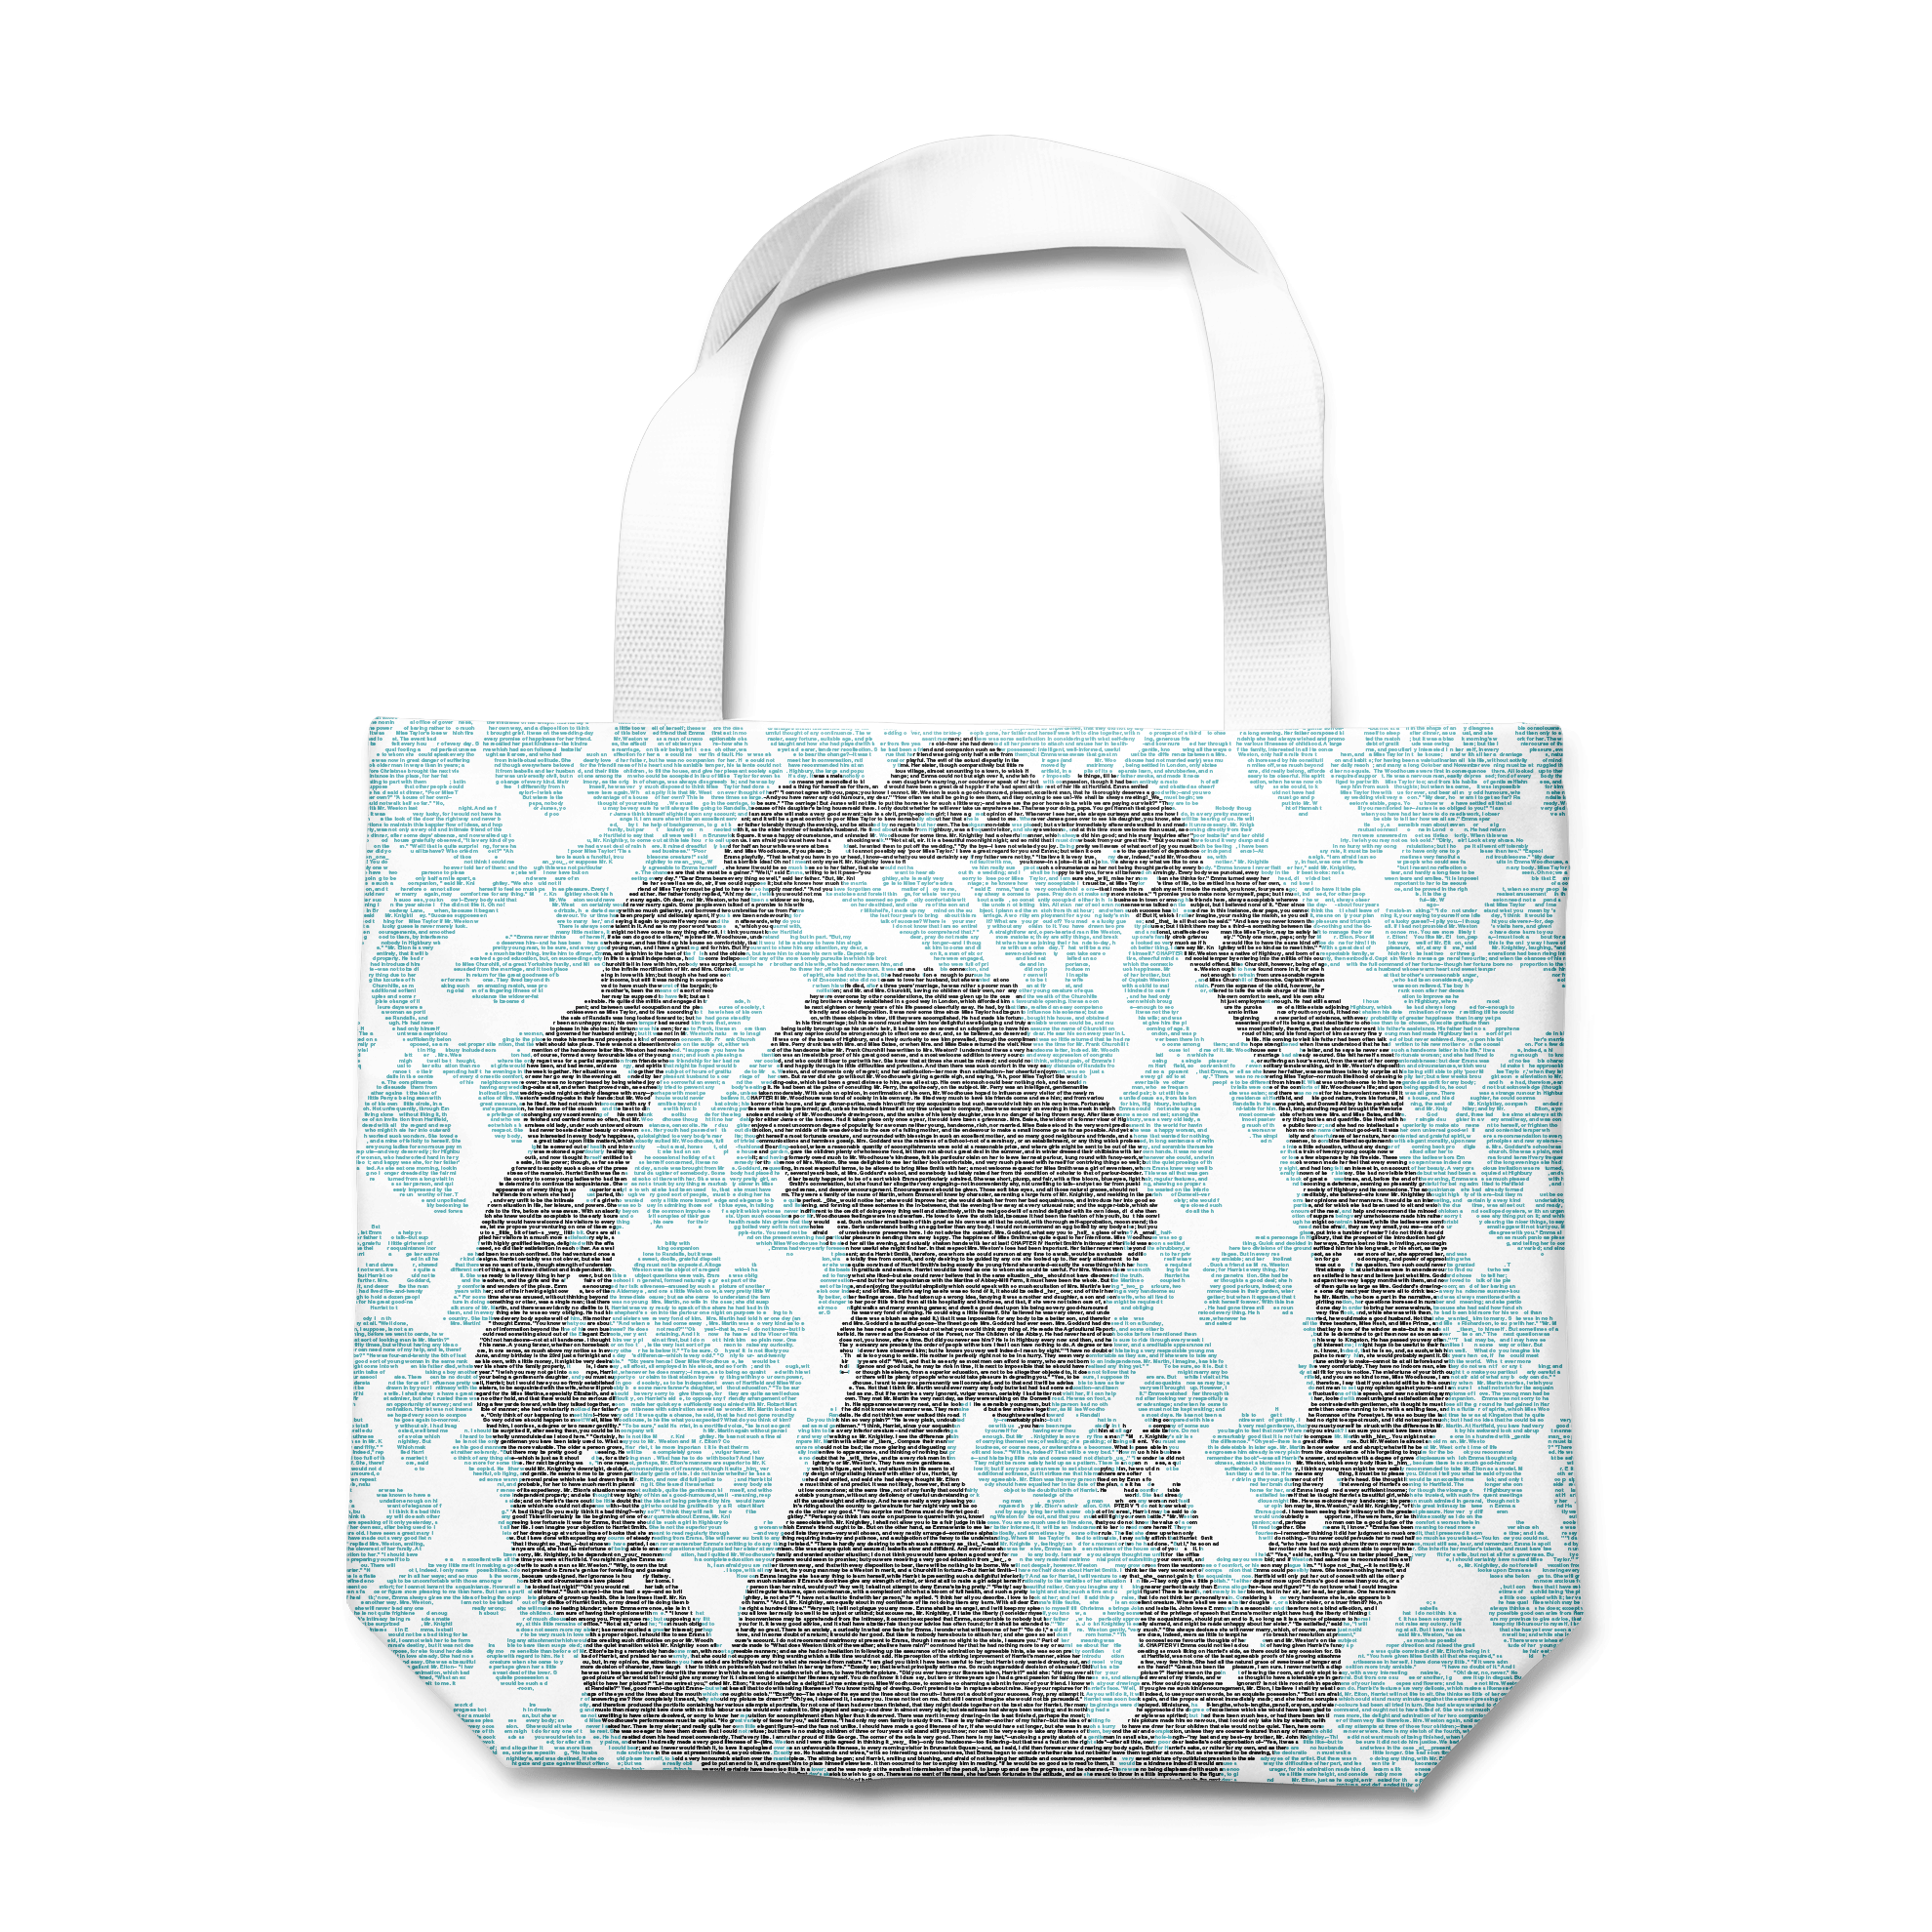 Alice in Wonderland Tote Bag by Quotes Literary Apparel